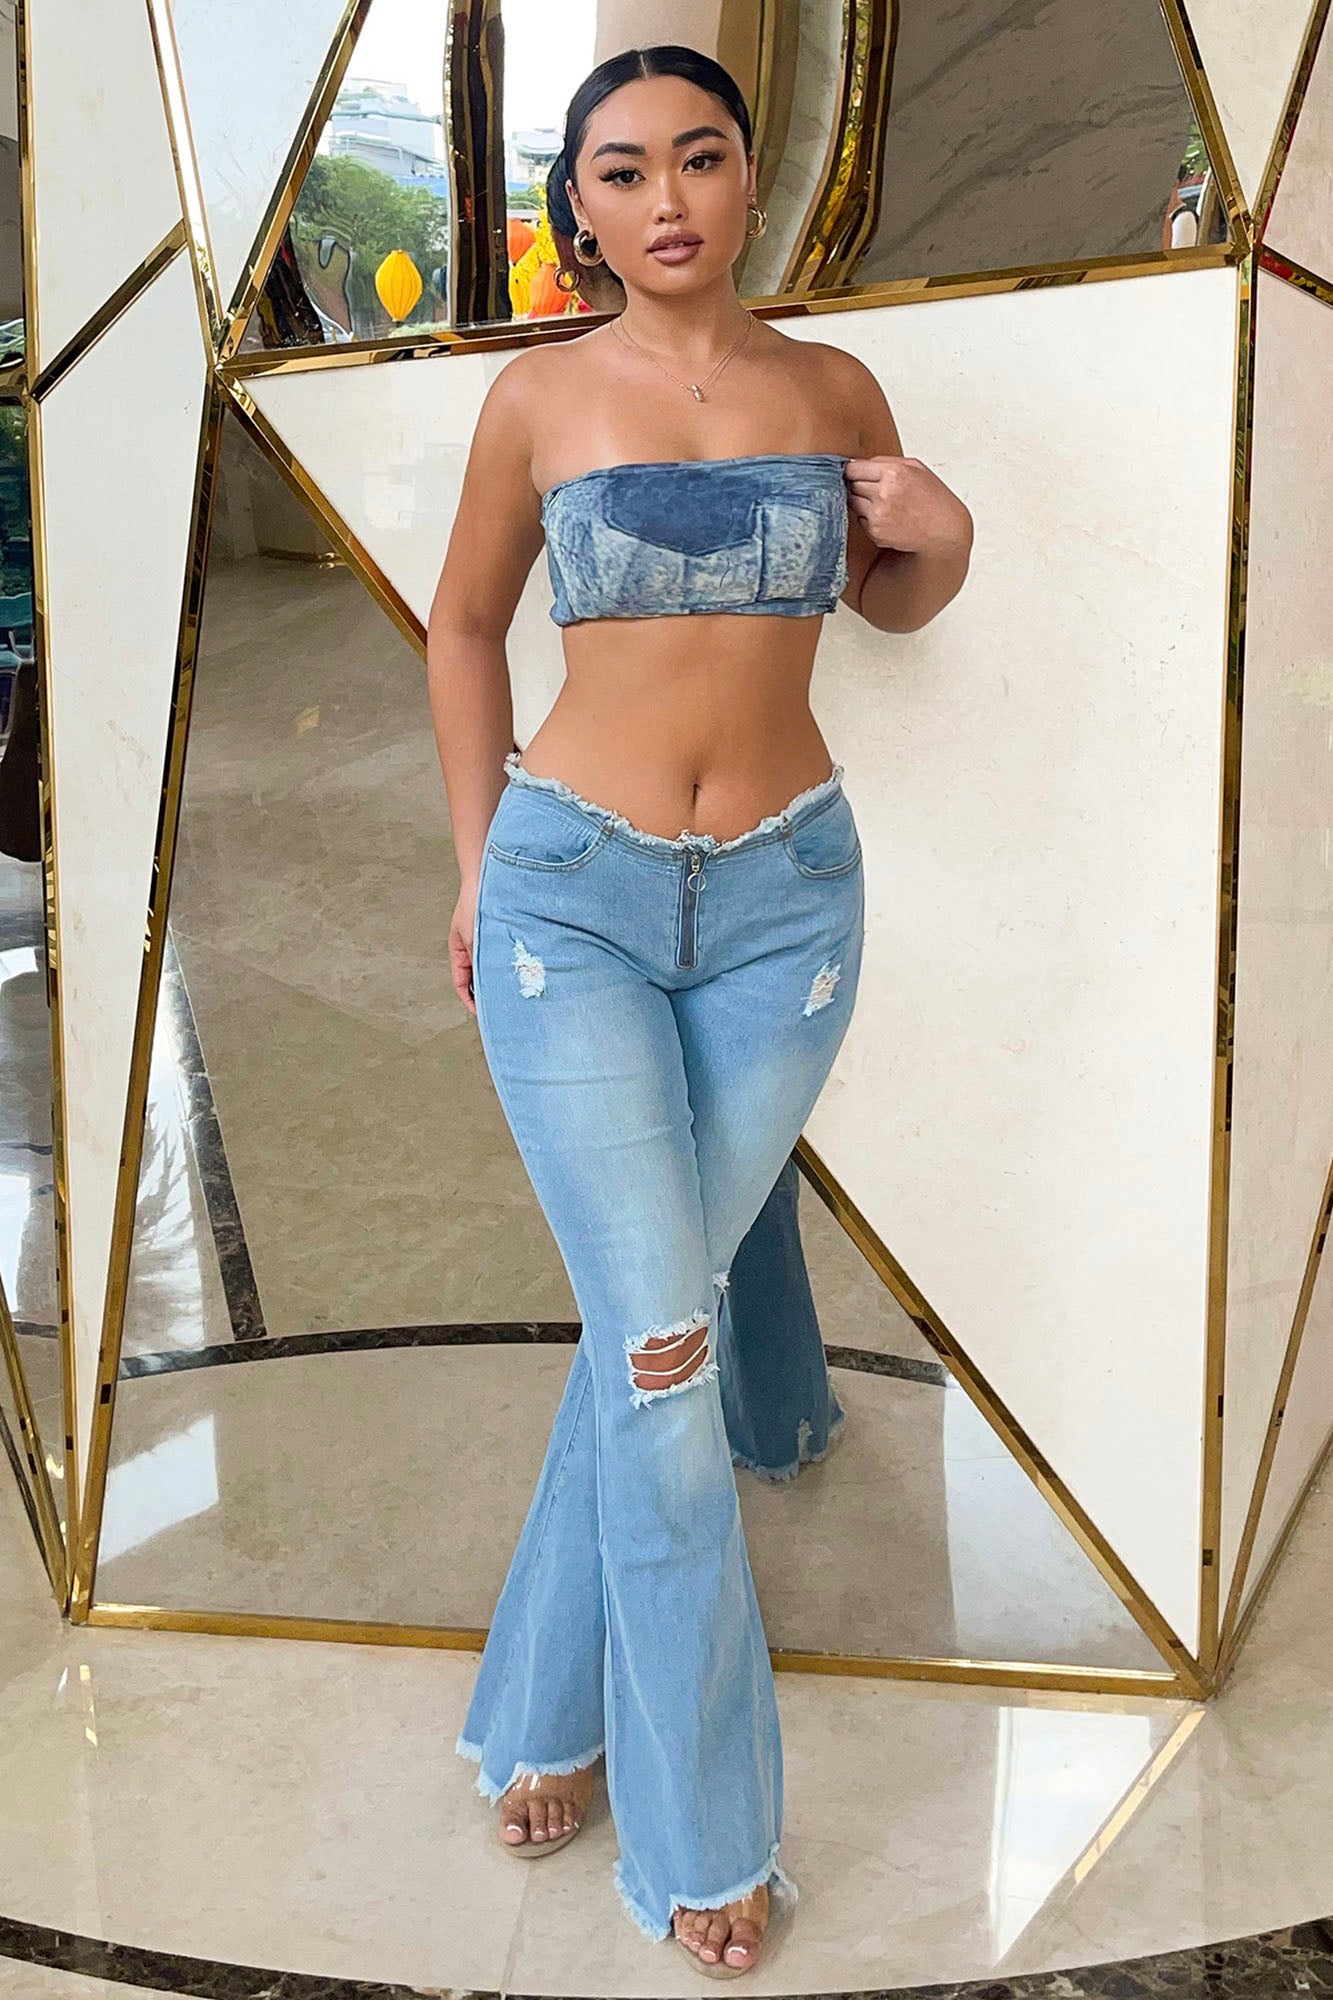 Britney Low Rise Ripped Flared Jeans - Light Blue Wash